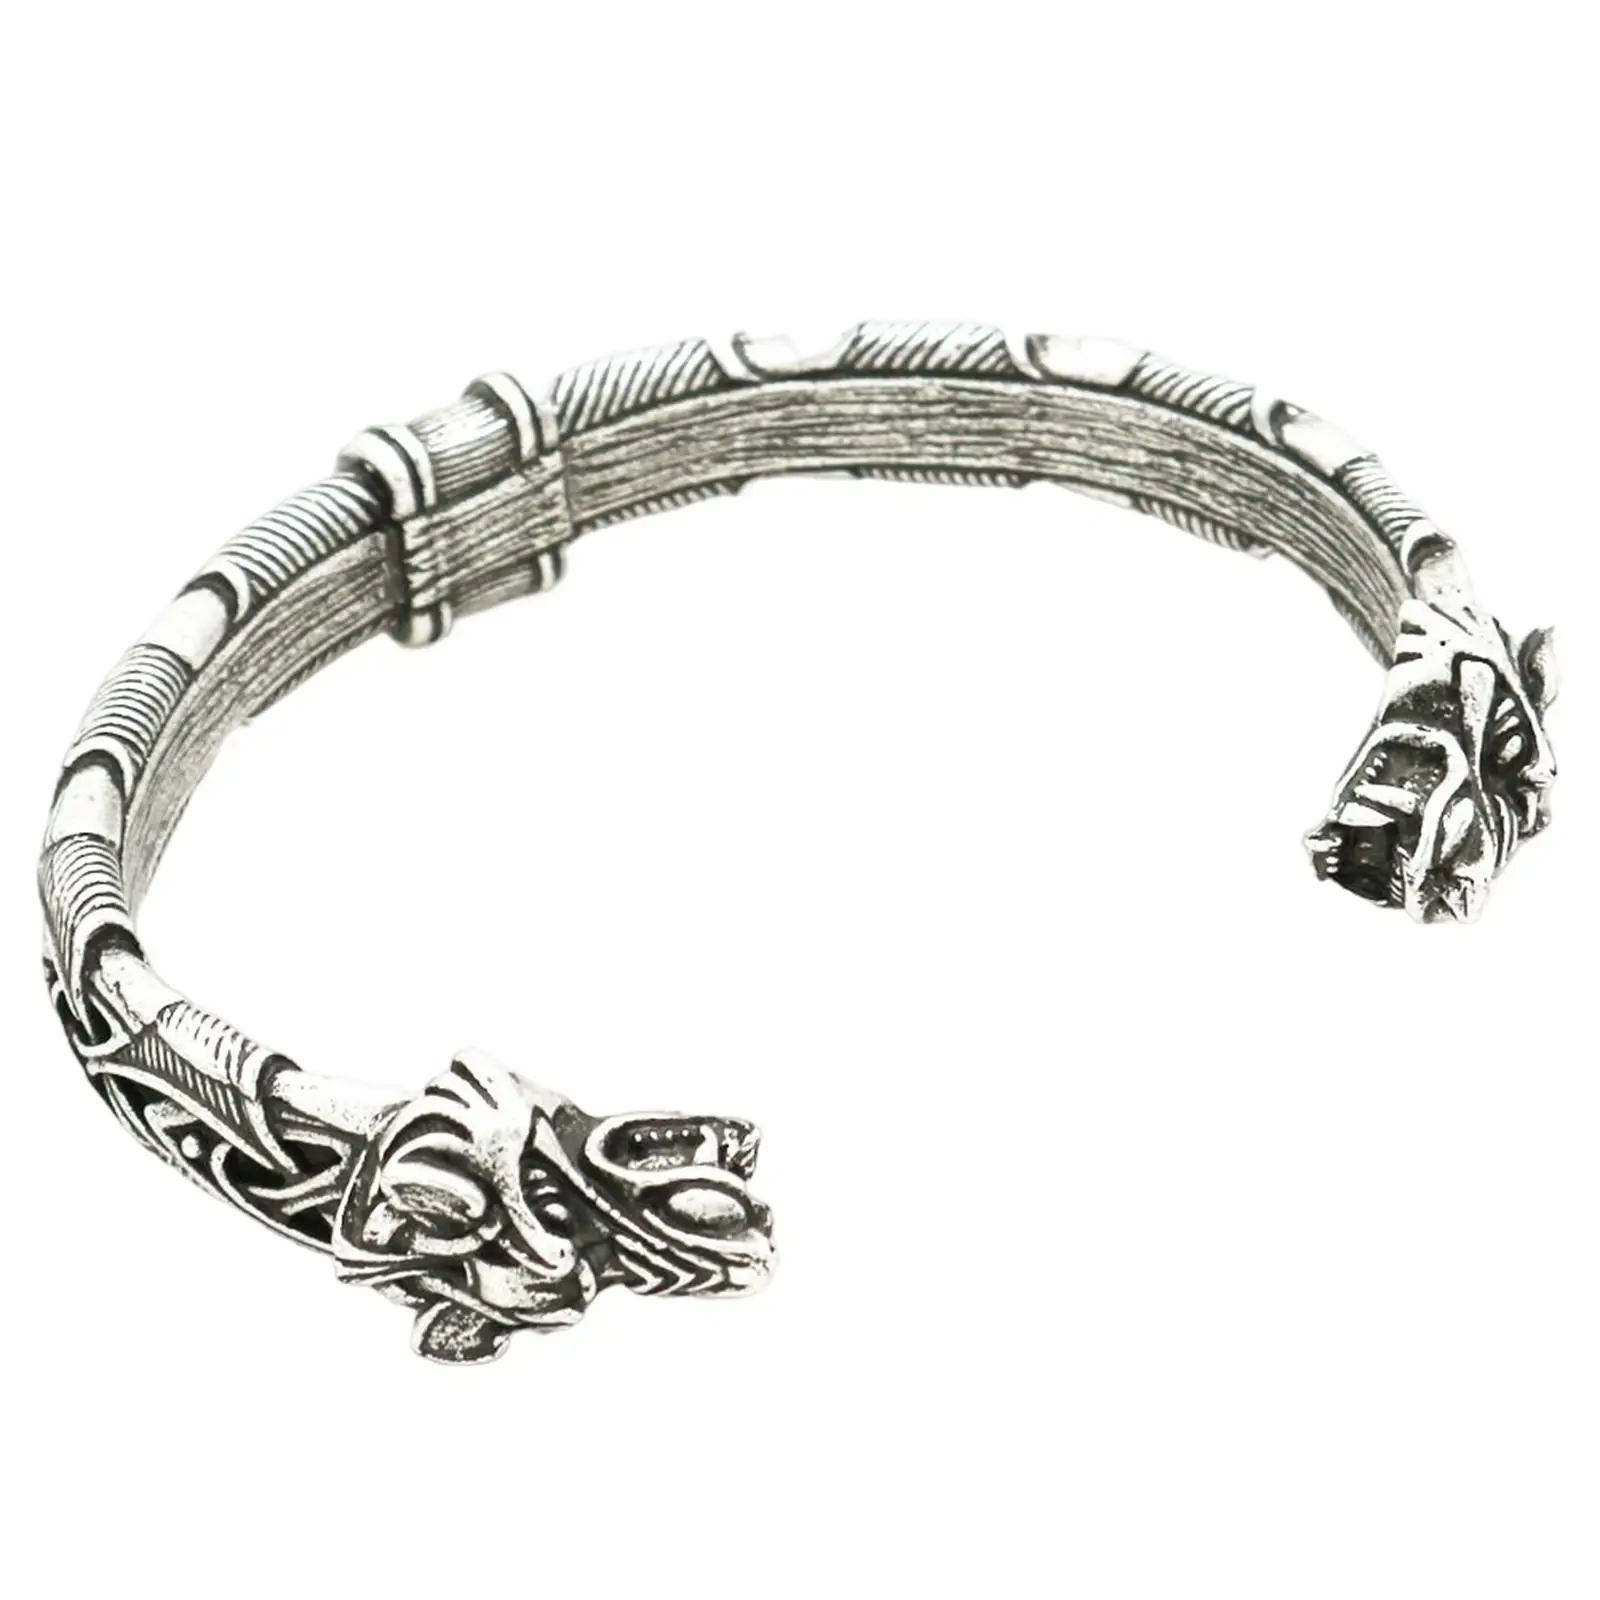  Mens Bracelet, Bangle Cuff Arm Wristband Bracelet Jewelry measures 7cm in diameter, can be adjusted to wrist.